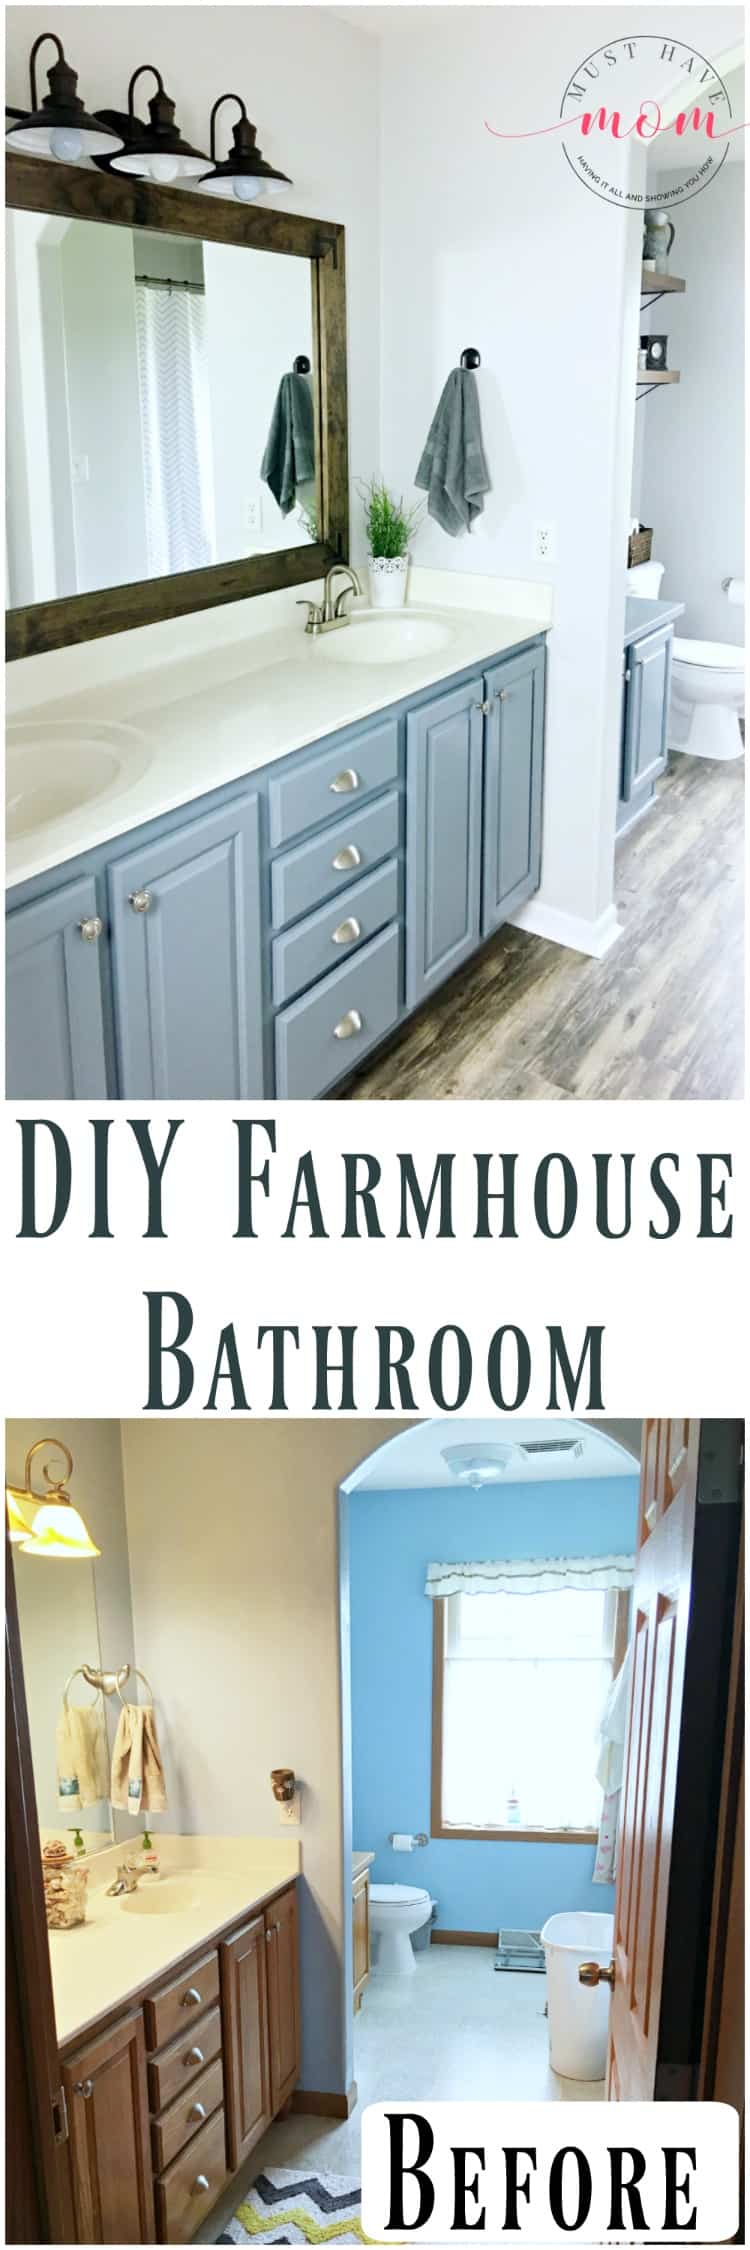 Fixer upper bathroom before and after. Get this look with her farmhouse bathroom DIY tutorial!